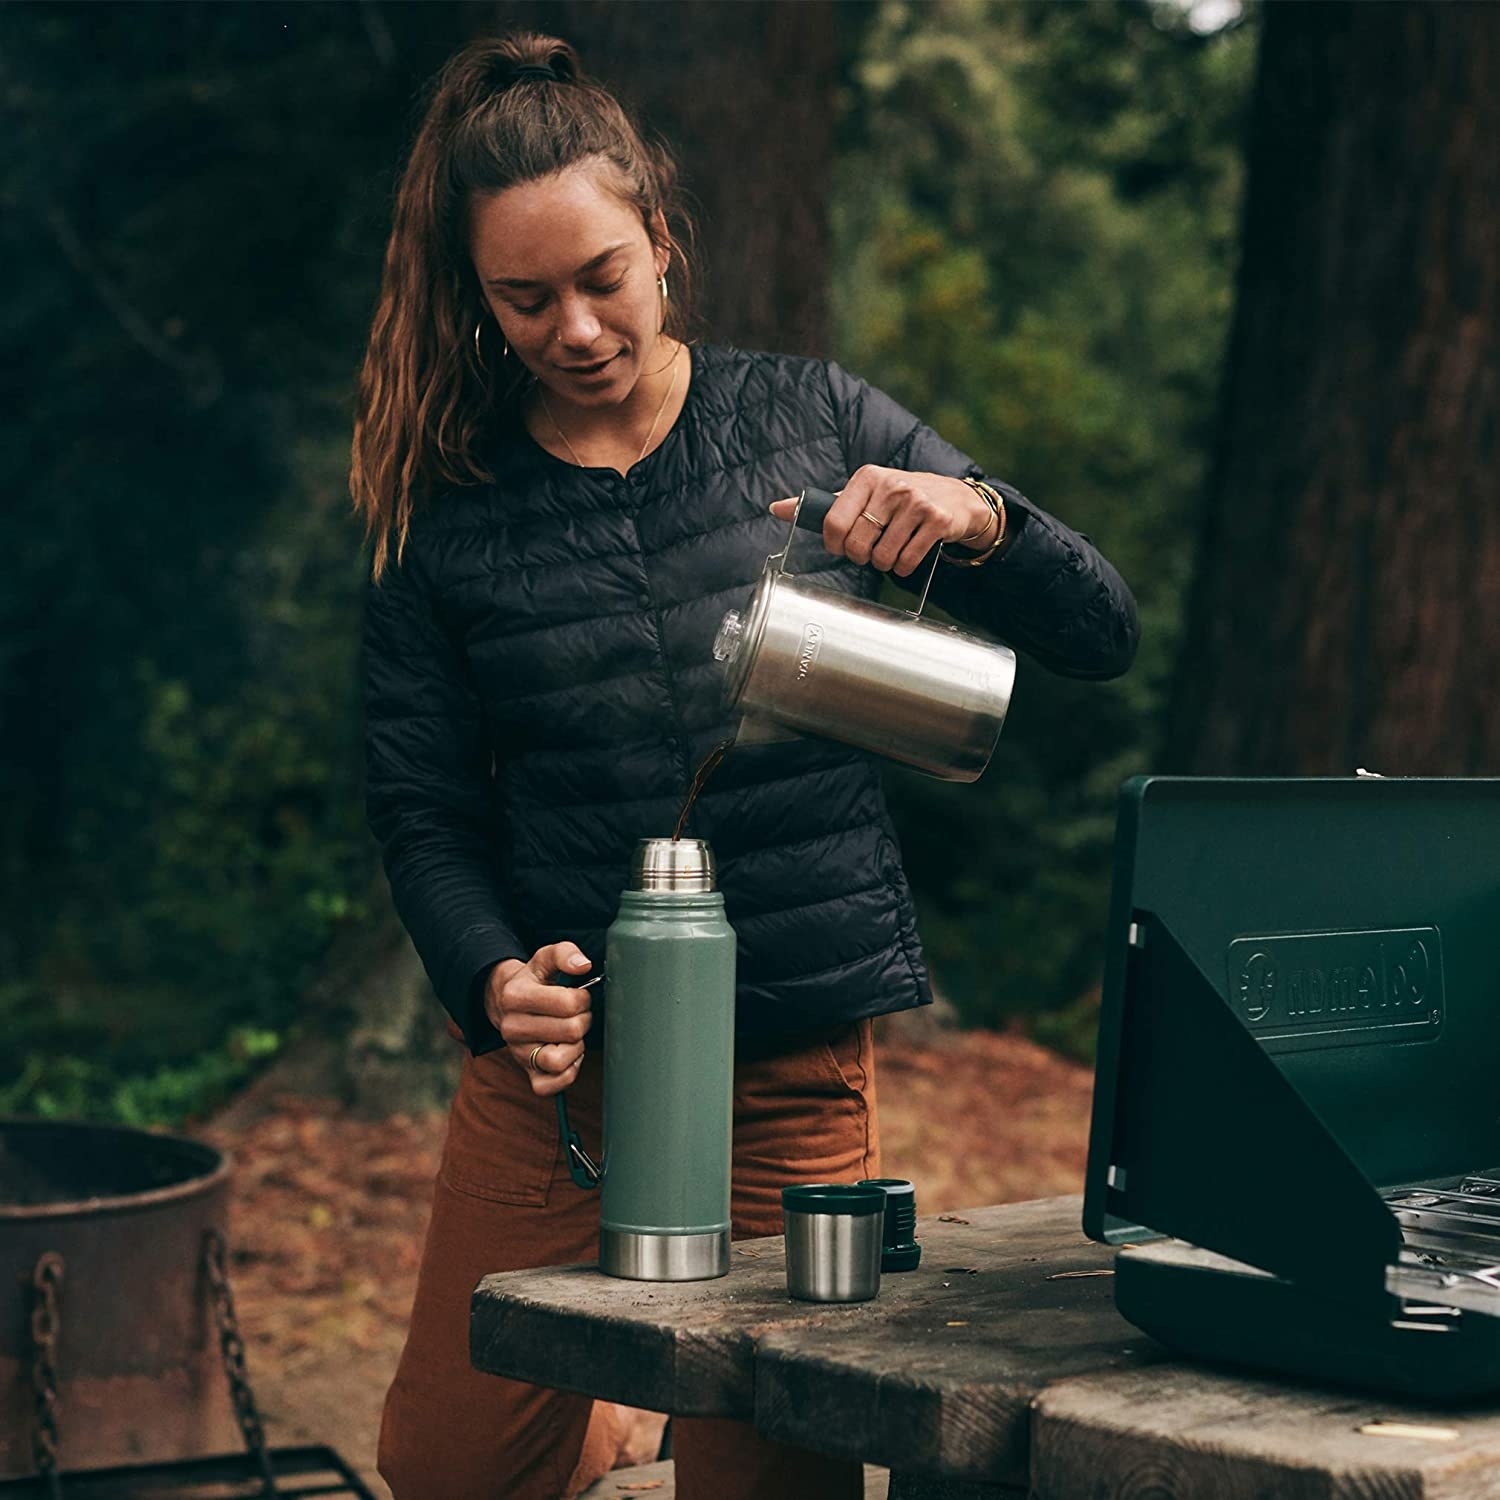 A model pouring a hot beverage into the wide-mouth thermos